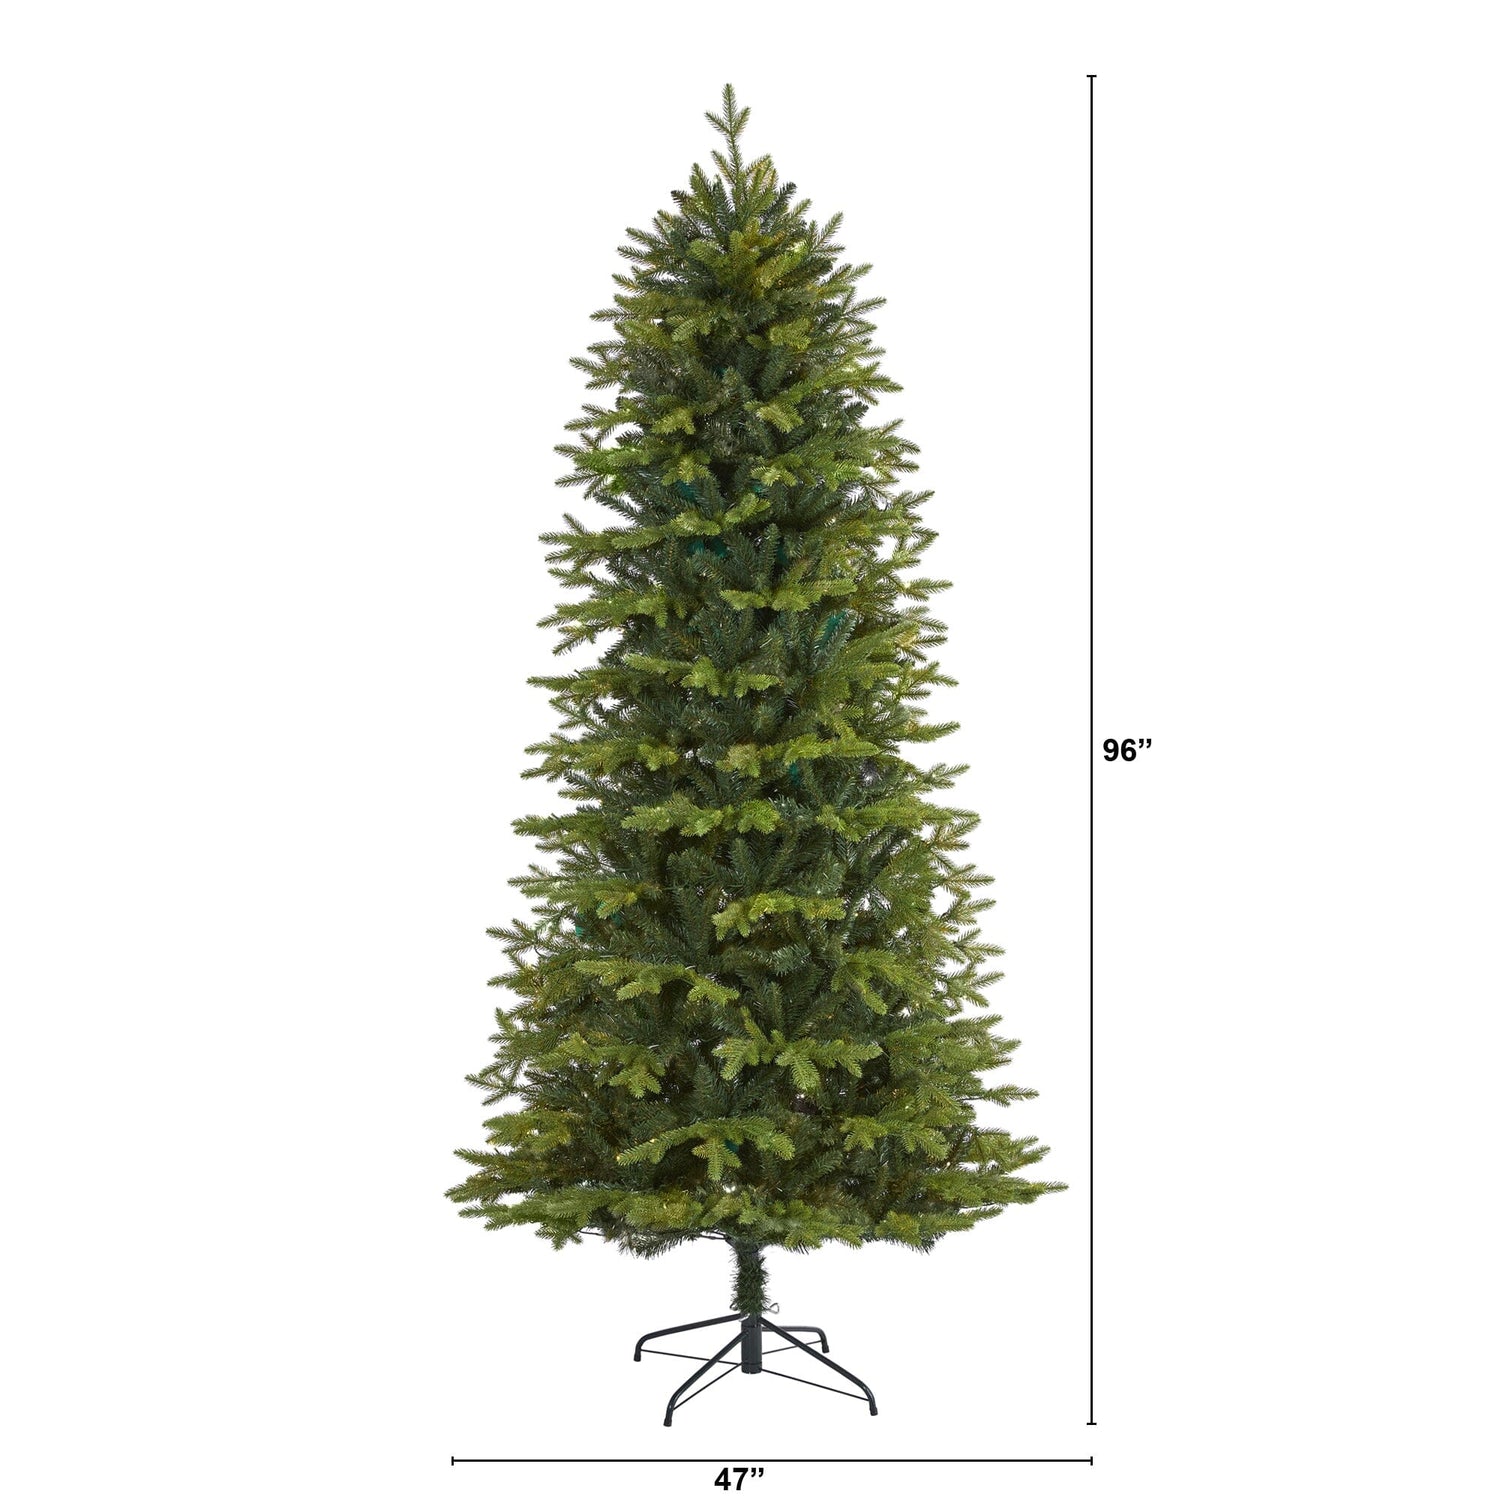 8’ Belgium Fir “Natural Look” Artificial Christmas Tree with 2358 Bendable Branches